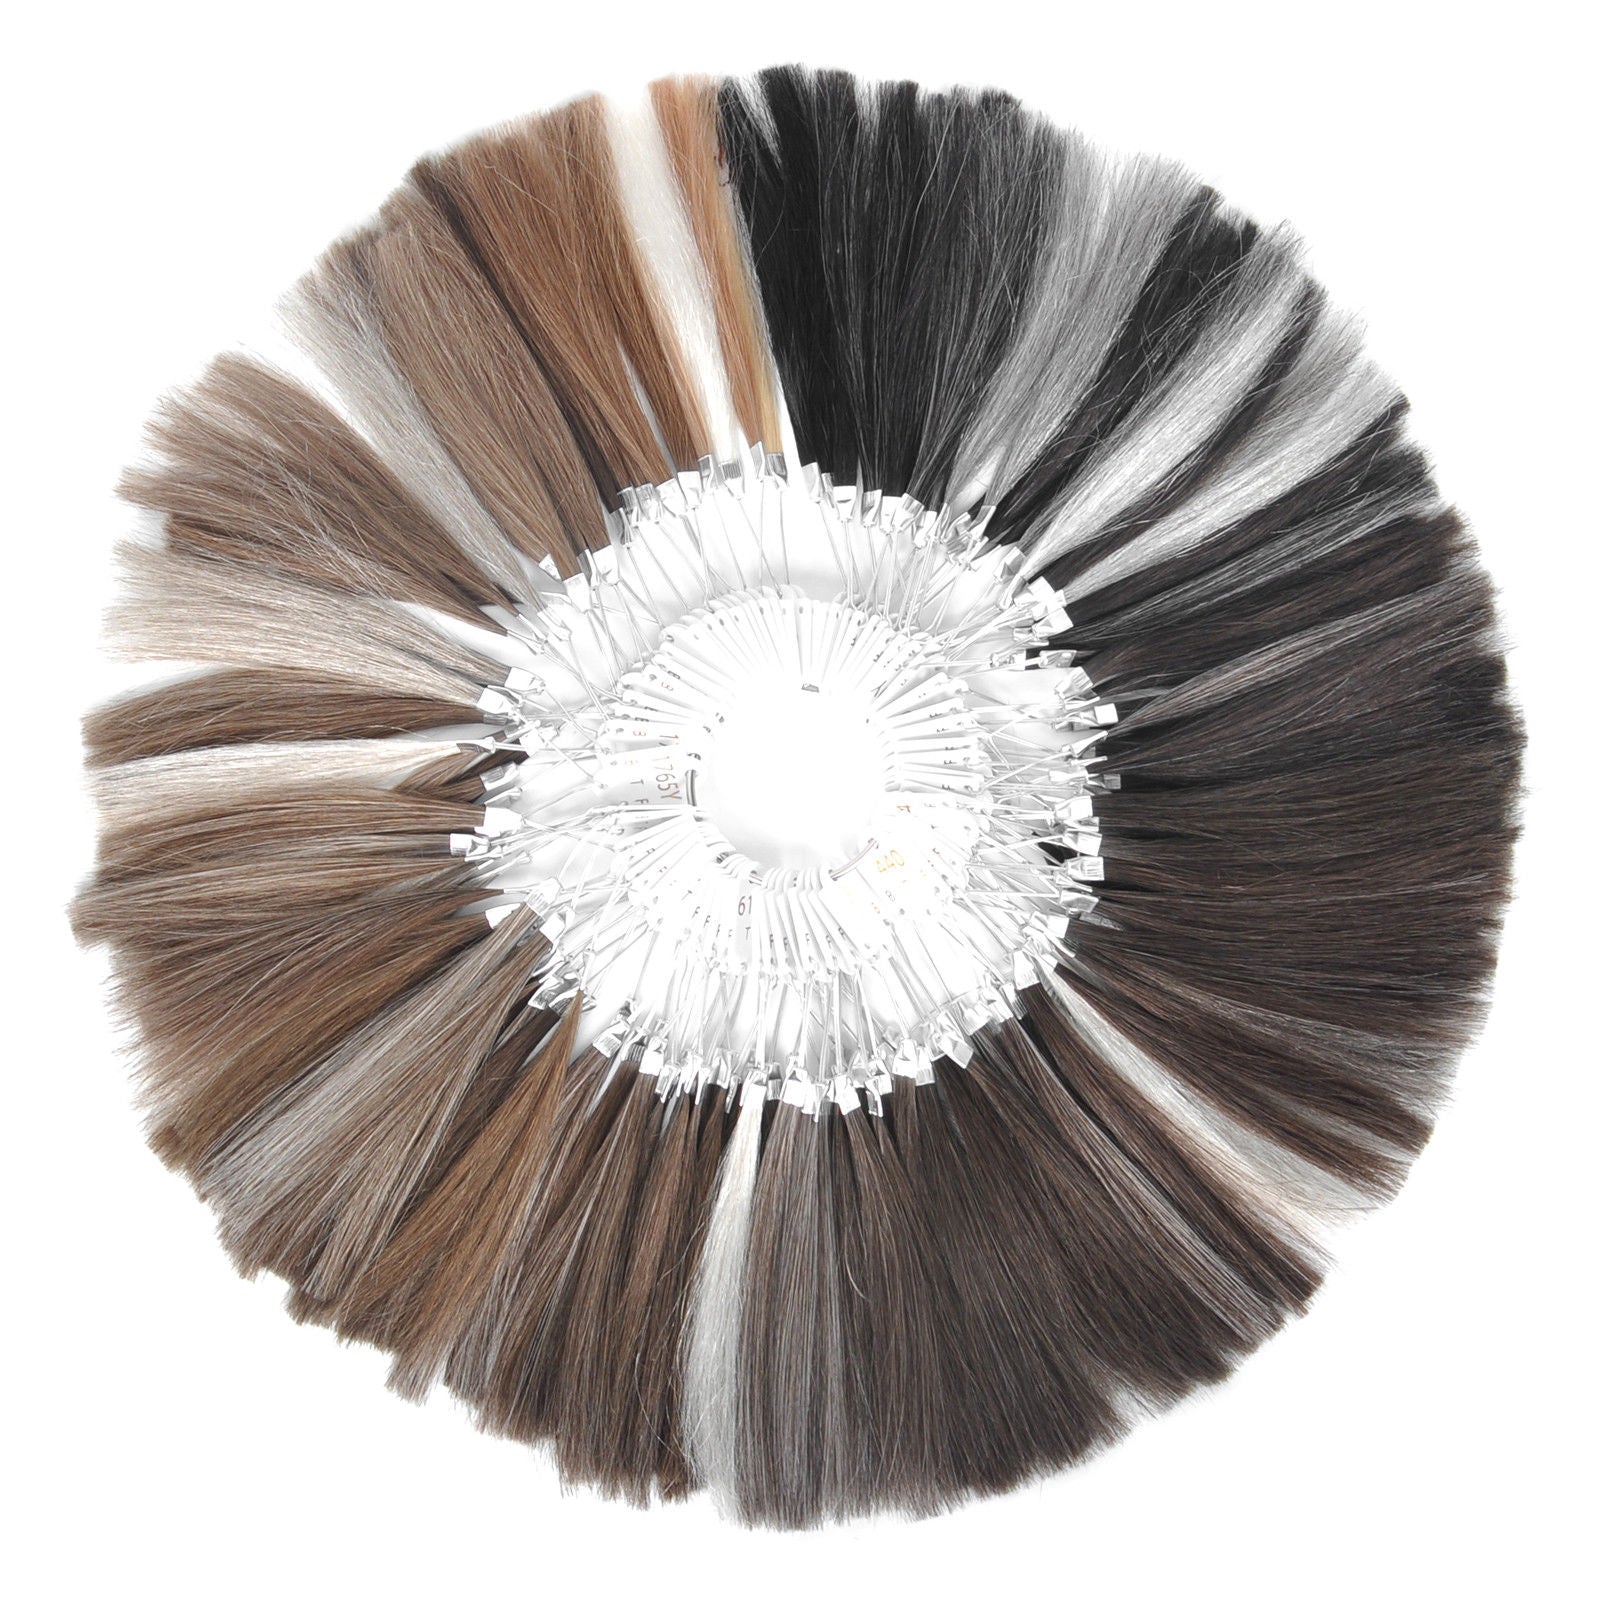 GEXWIGS Mens Toupee Hair Color Ring 63 Colors Human Hair Swatchs Samples.